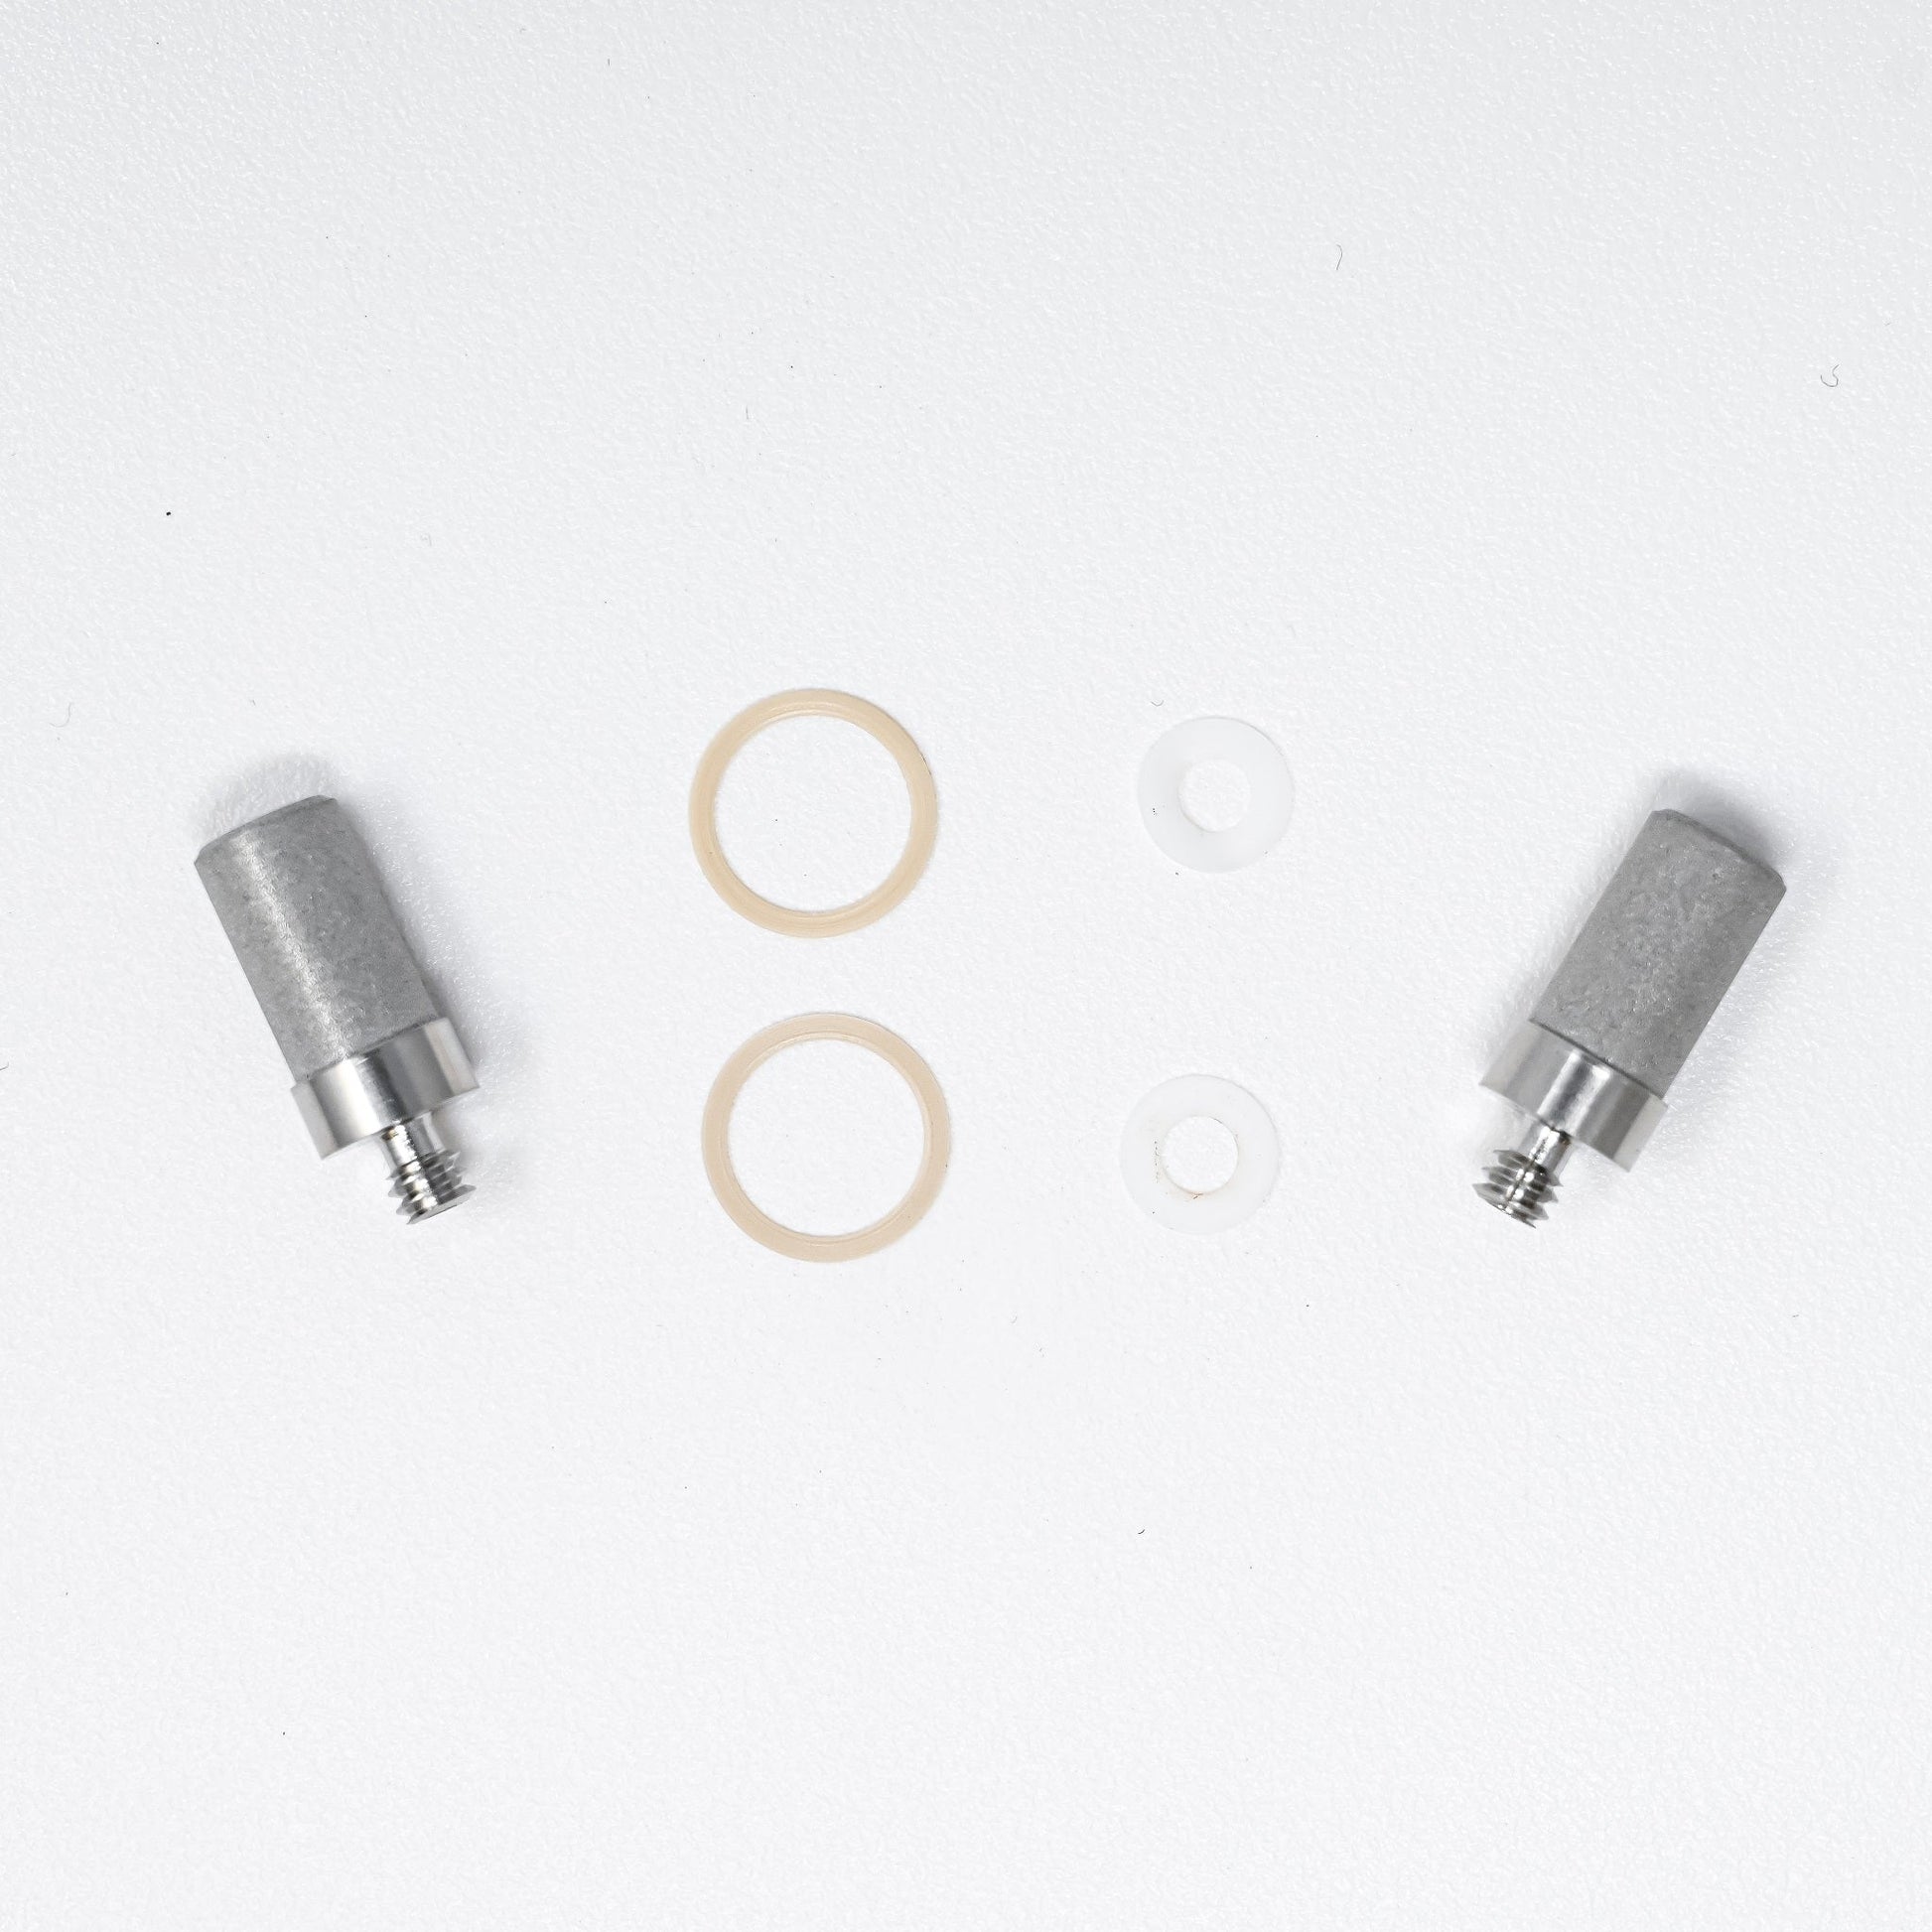 Cylindrical filter elements with o-rings and gaskets.